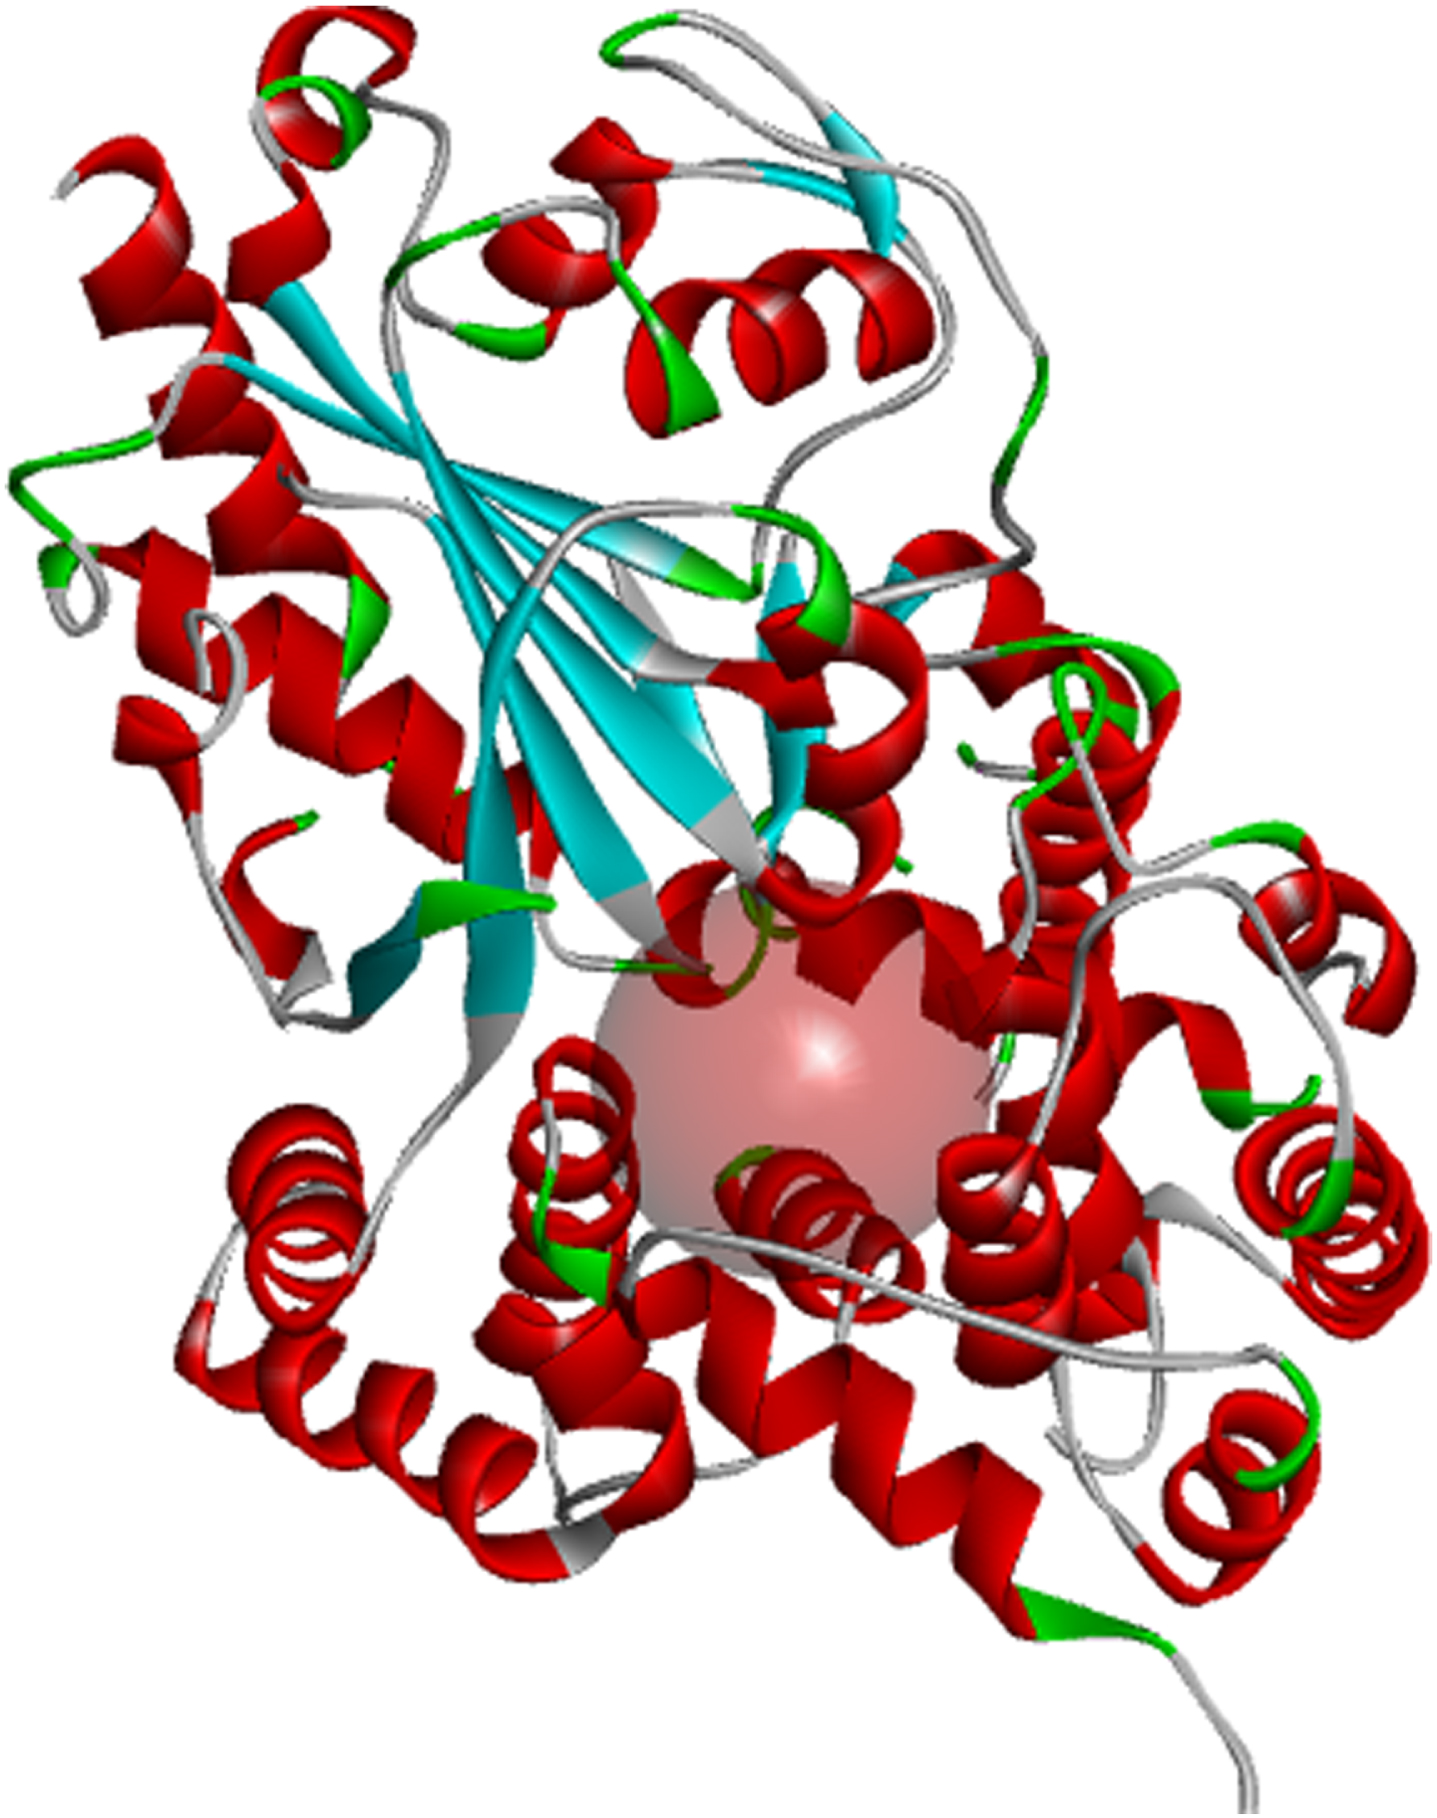 Binding pocket of the NLRP3 NACHT domain generated from its co-crystalized inhibitor.